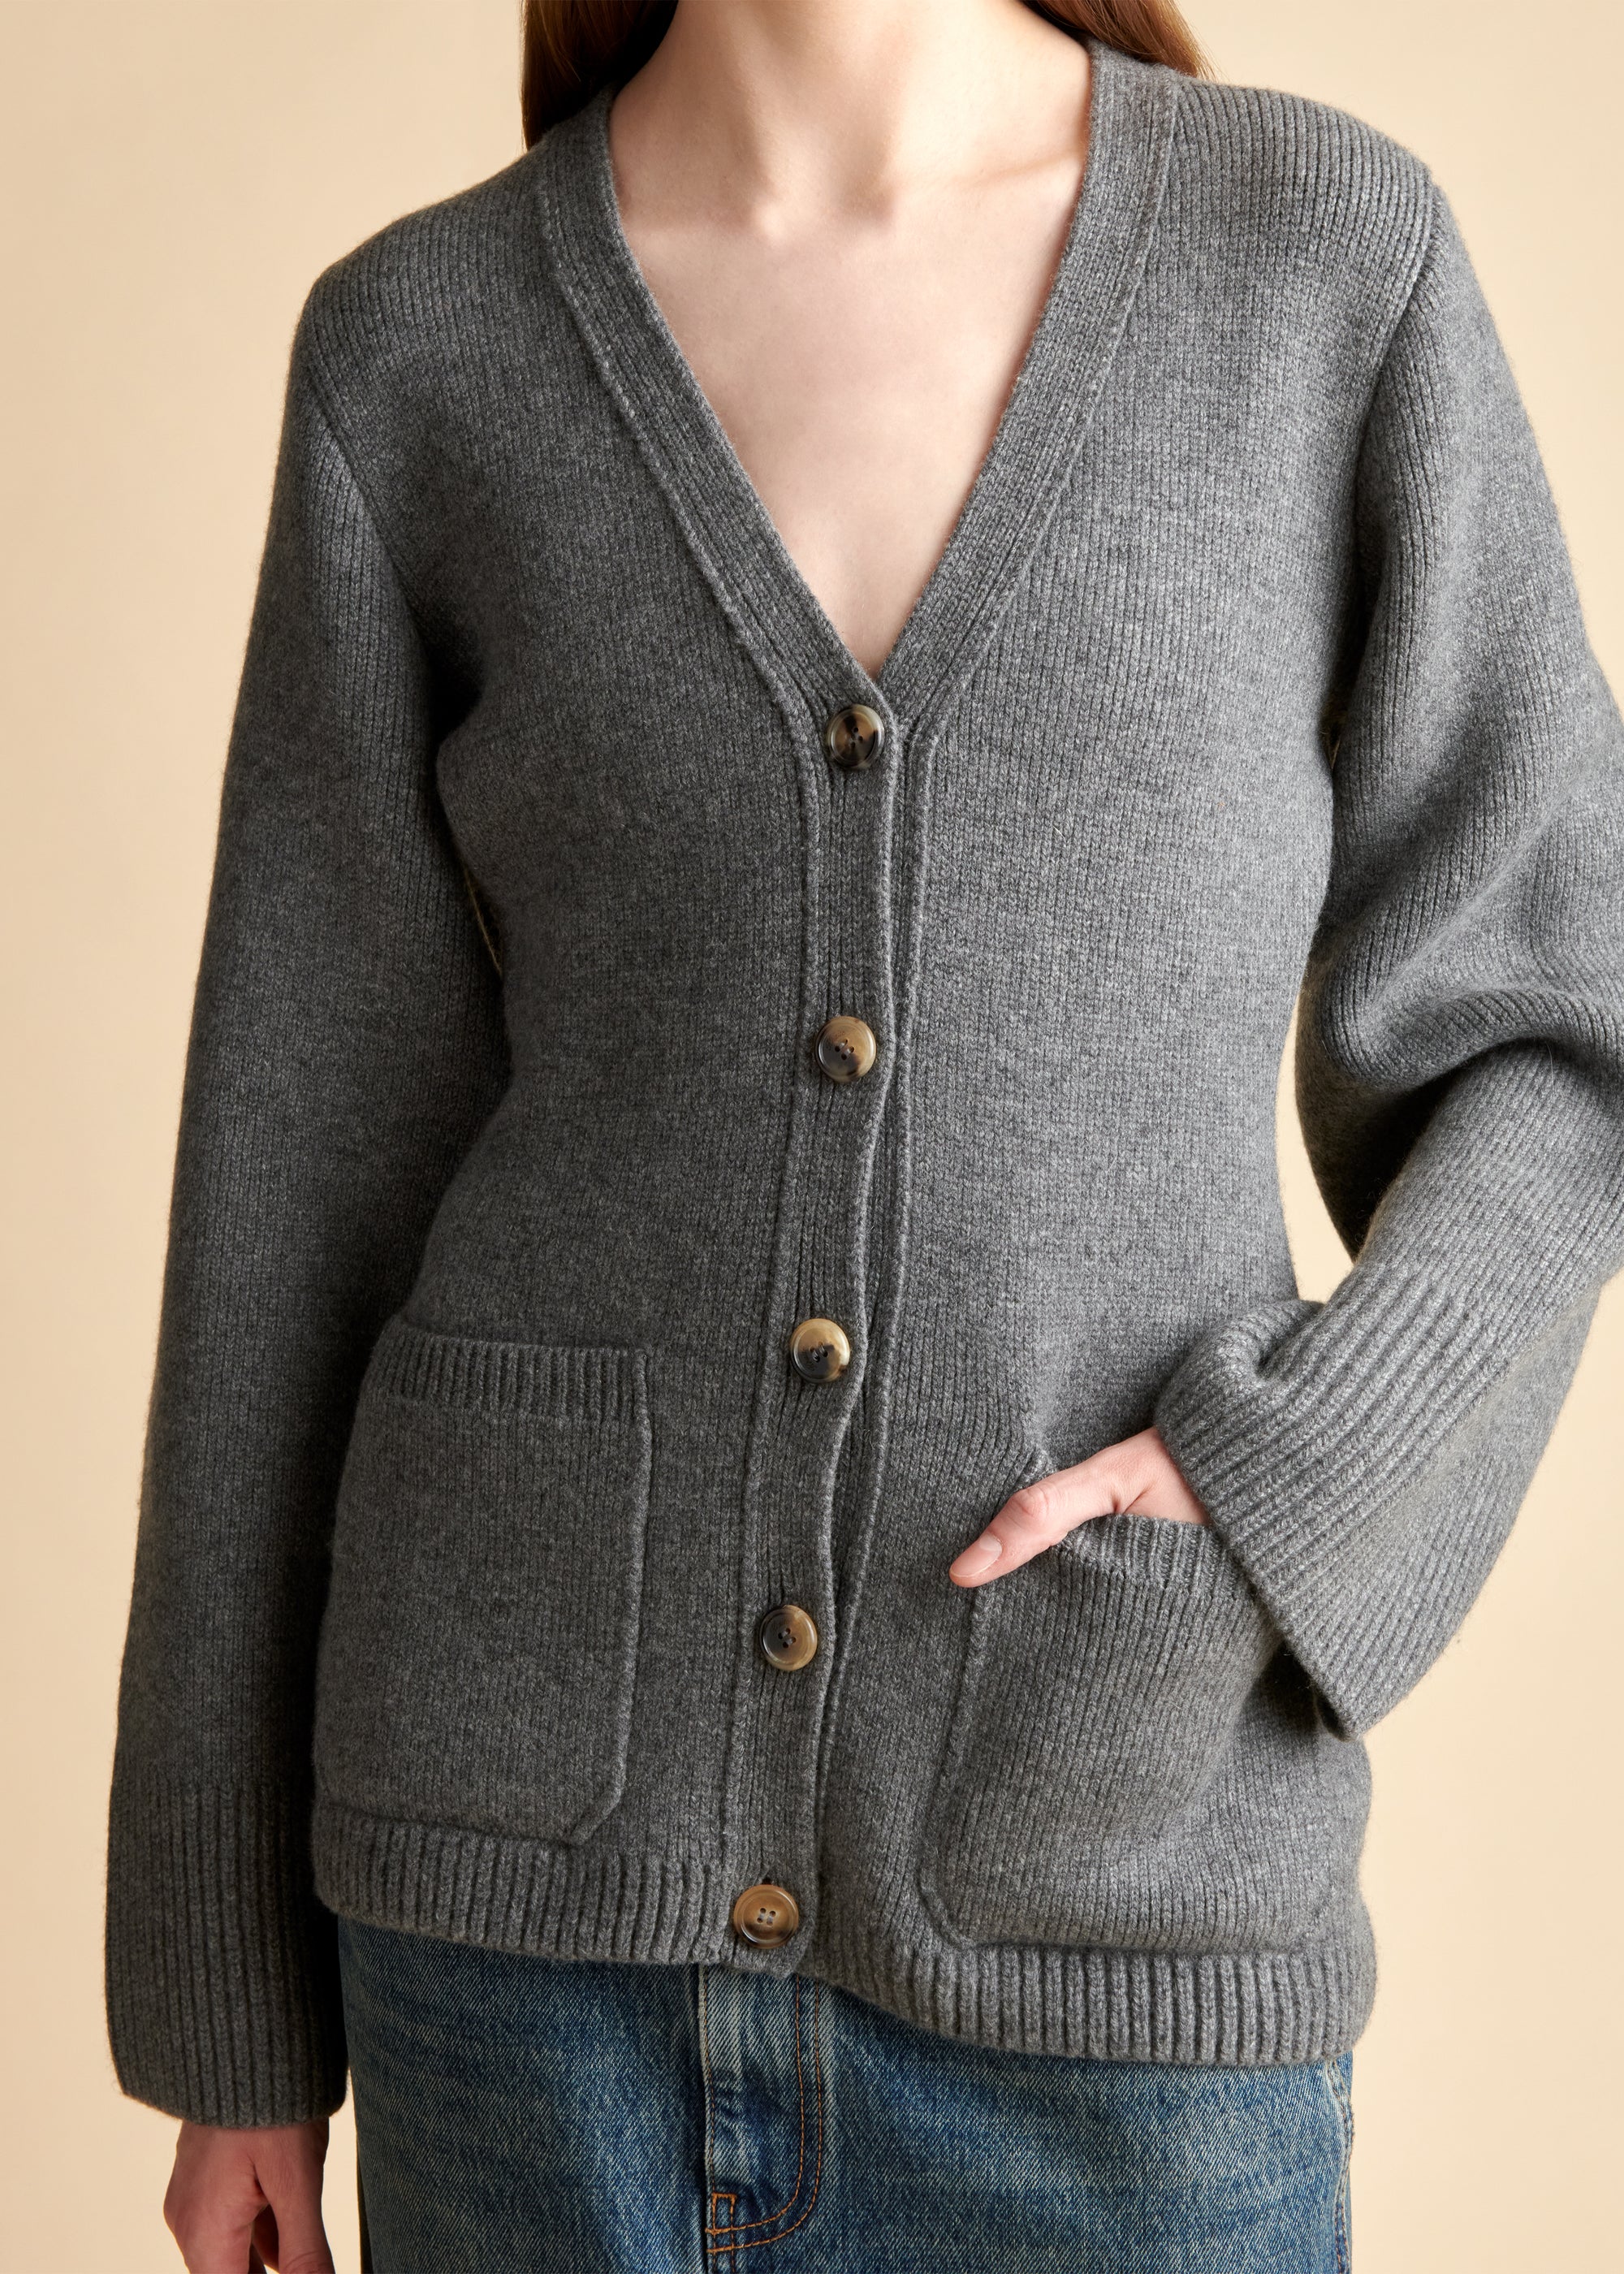 Lucy cardigan in cashmere - Smoke